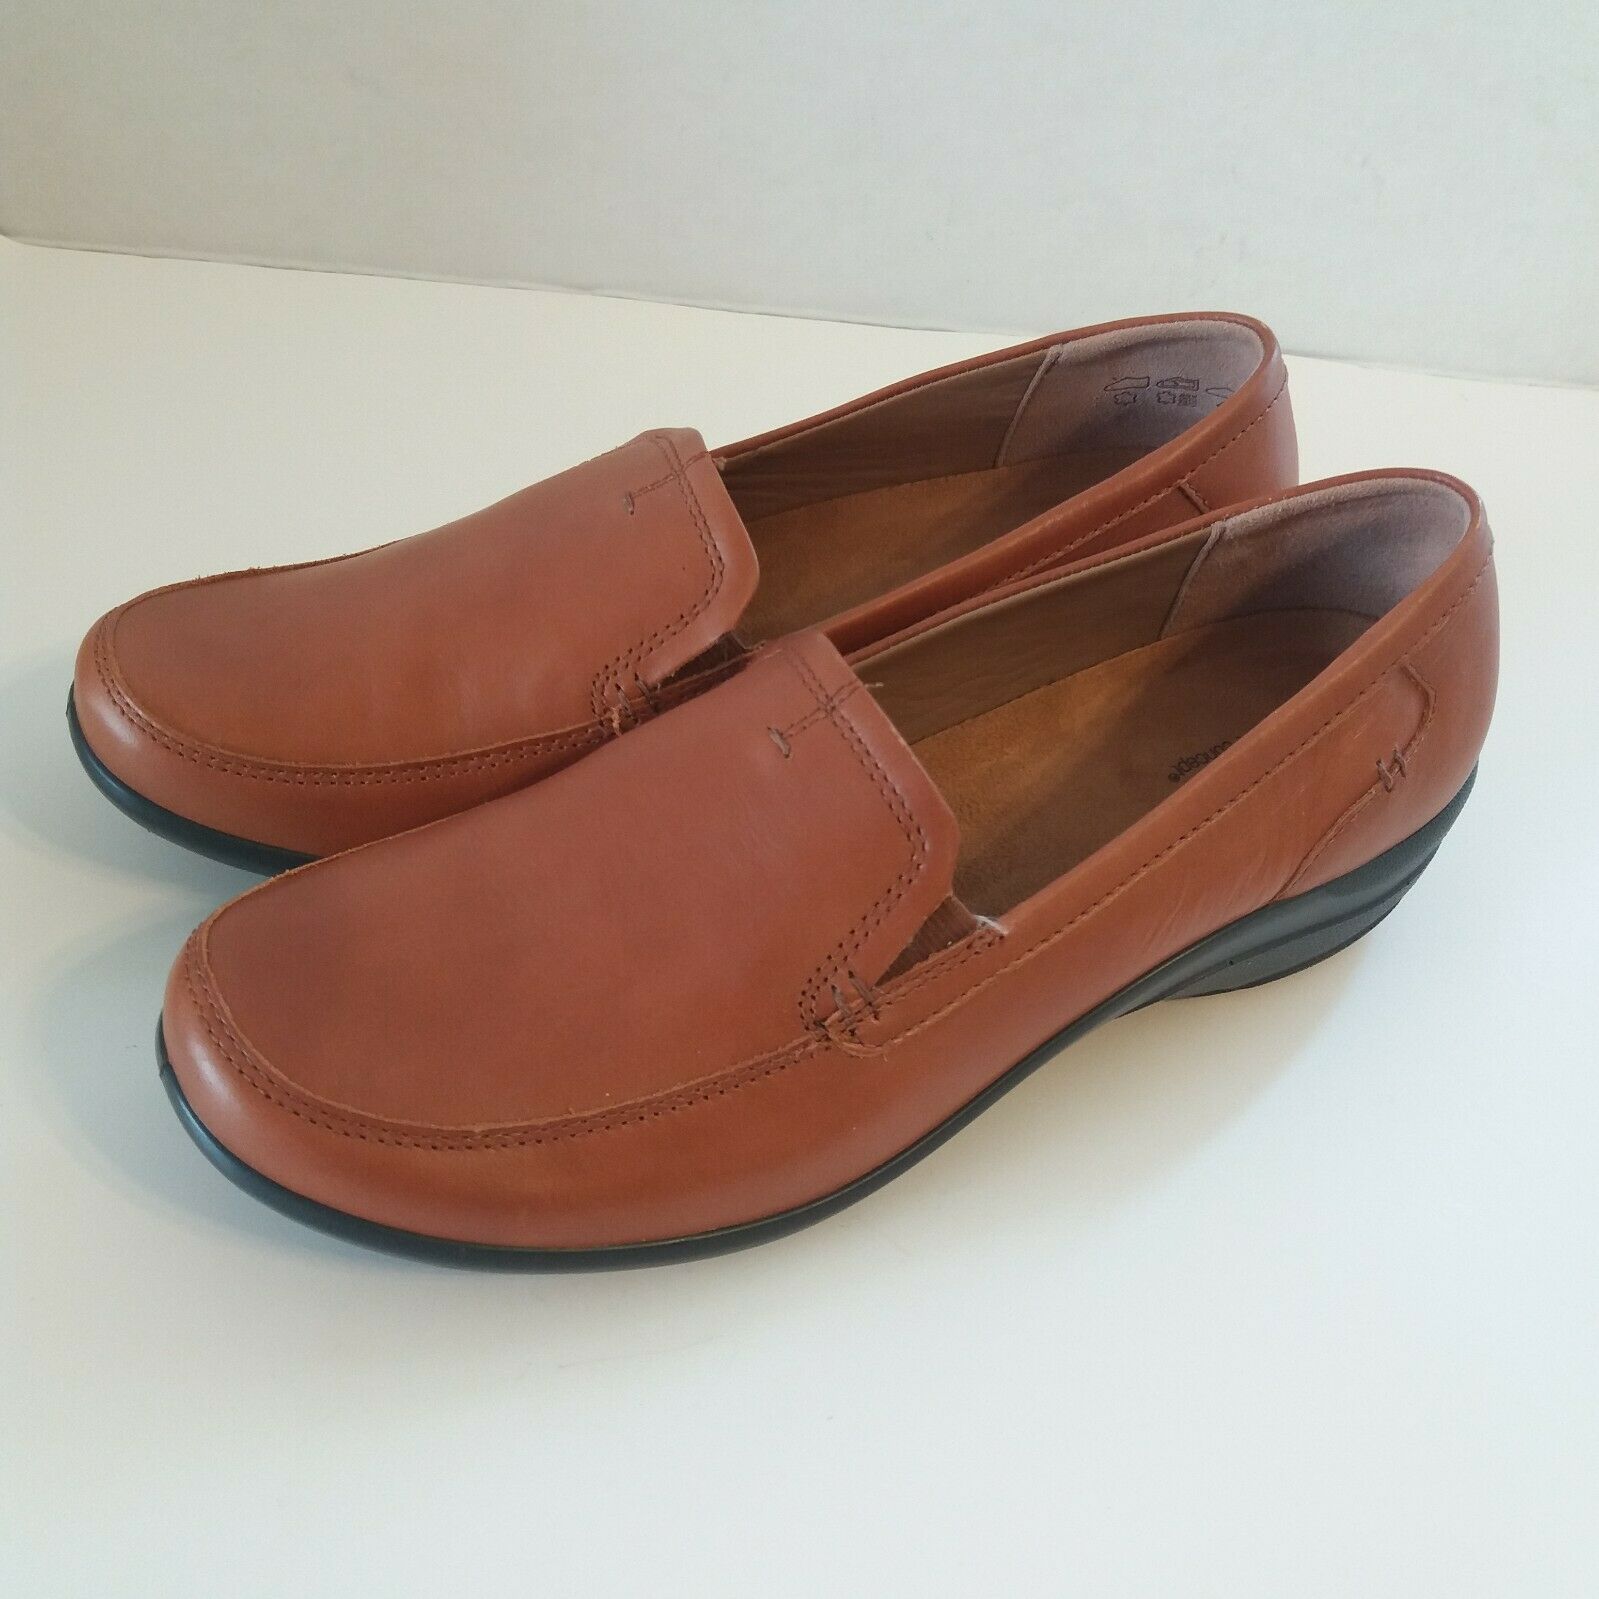 NWOT Hotter Envy Women Loafers Shoes Leather Size 9 1/2 Made in England ...